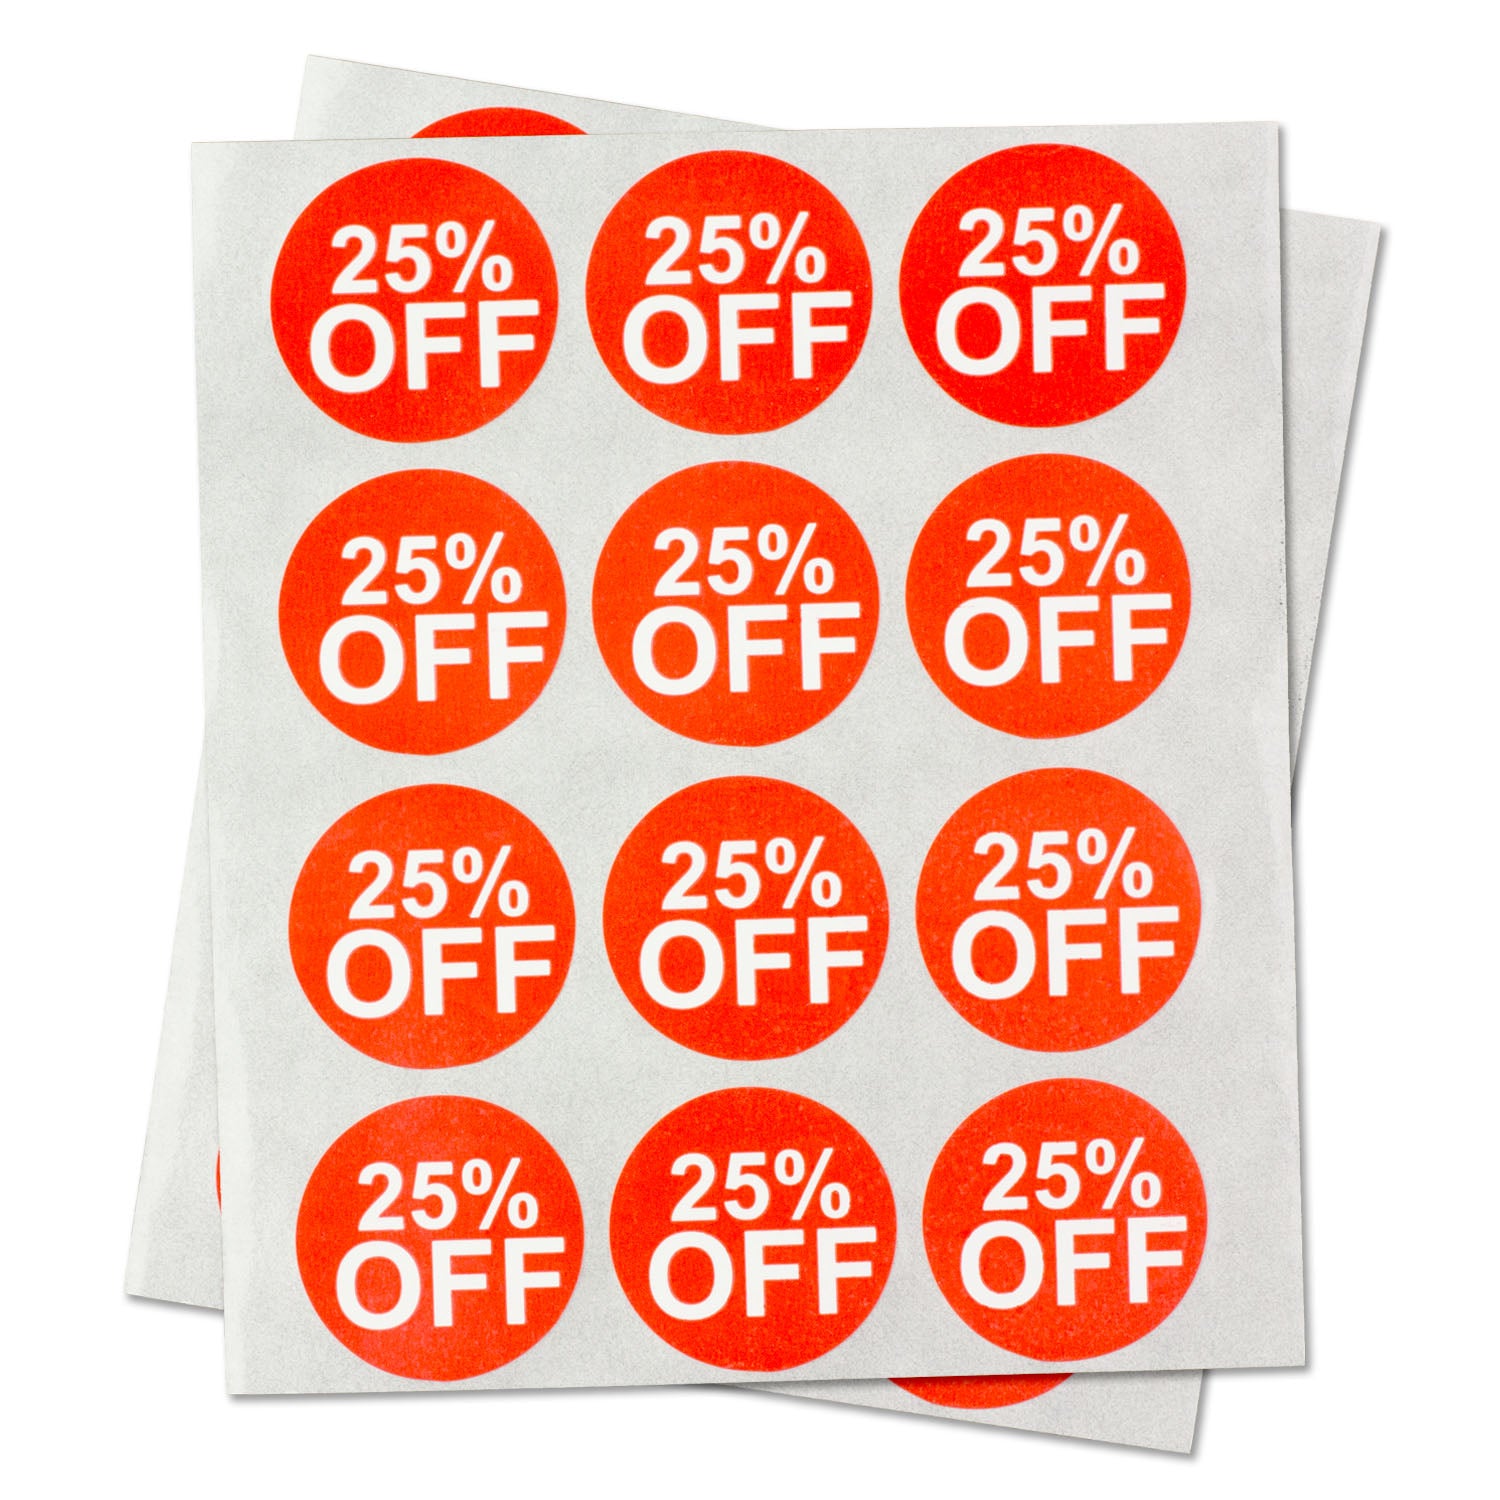 10% 25% 50% Sale Price Stickers Labels Percent Off Stickers for Retail  Store